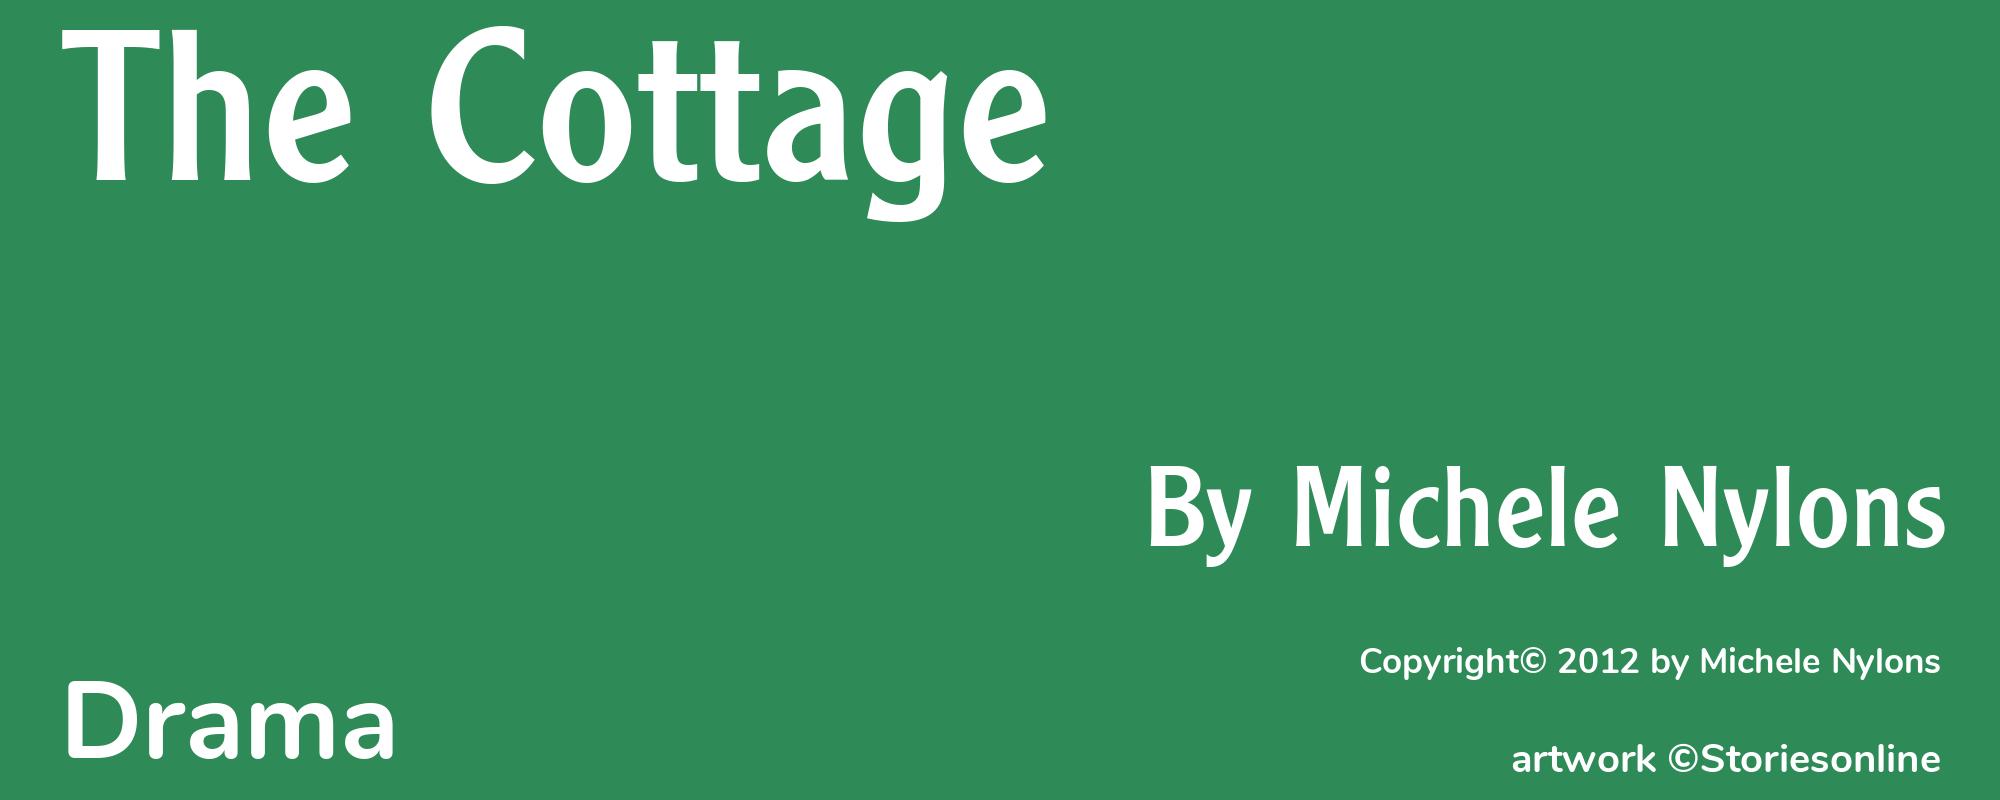 The Cottage - Cover